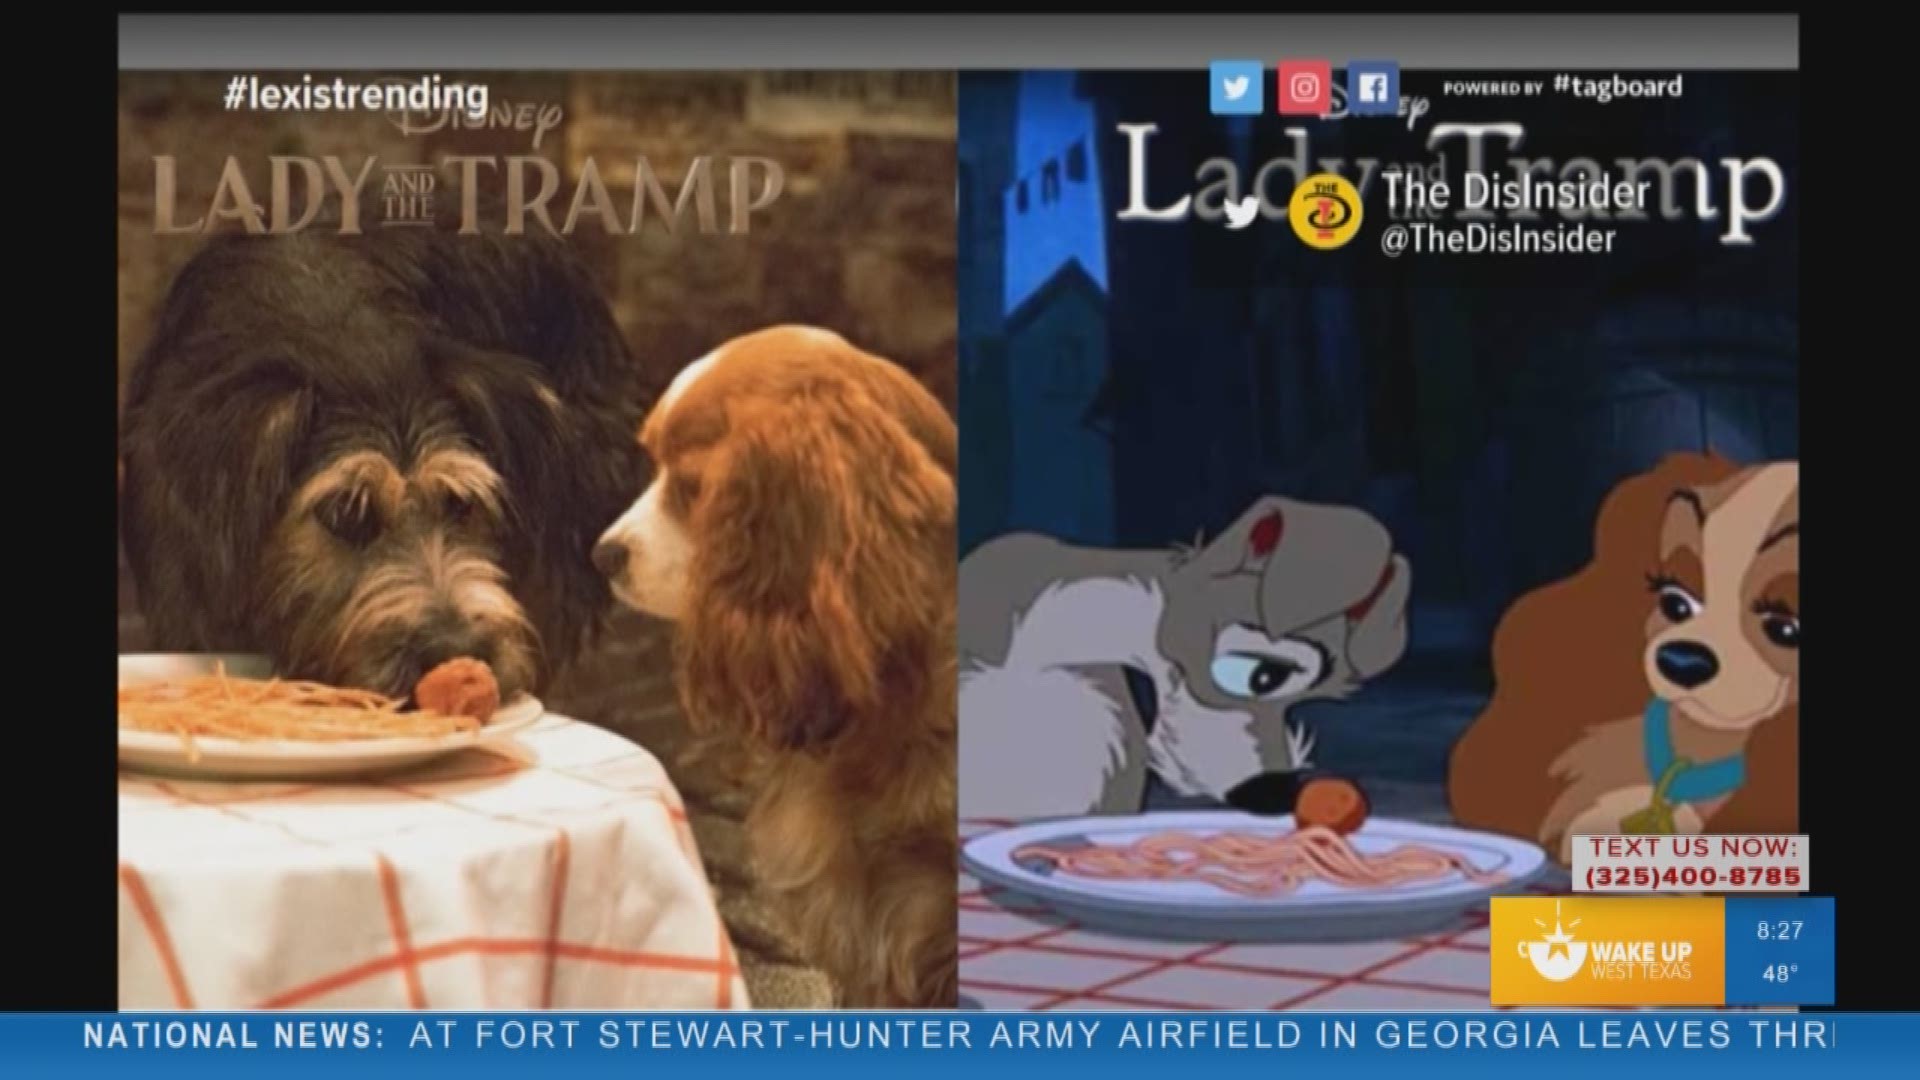 A Lady and the Tramp remake is trending this morning on twitter and getting everyone talking. Our WUWT team breaks down what people are saying.